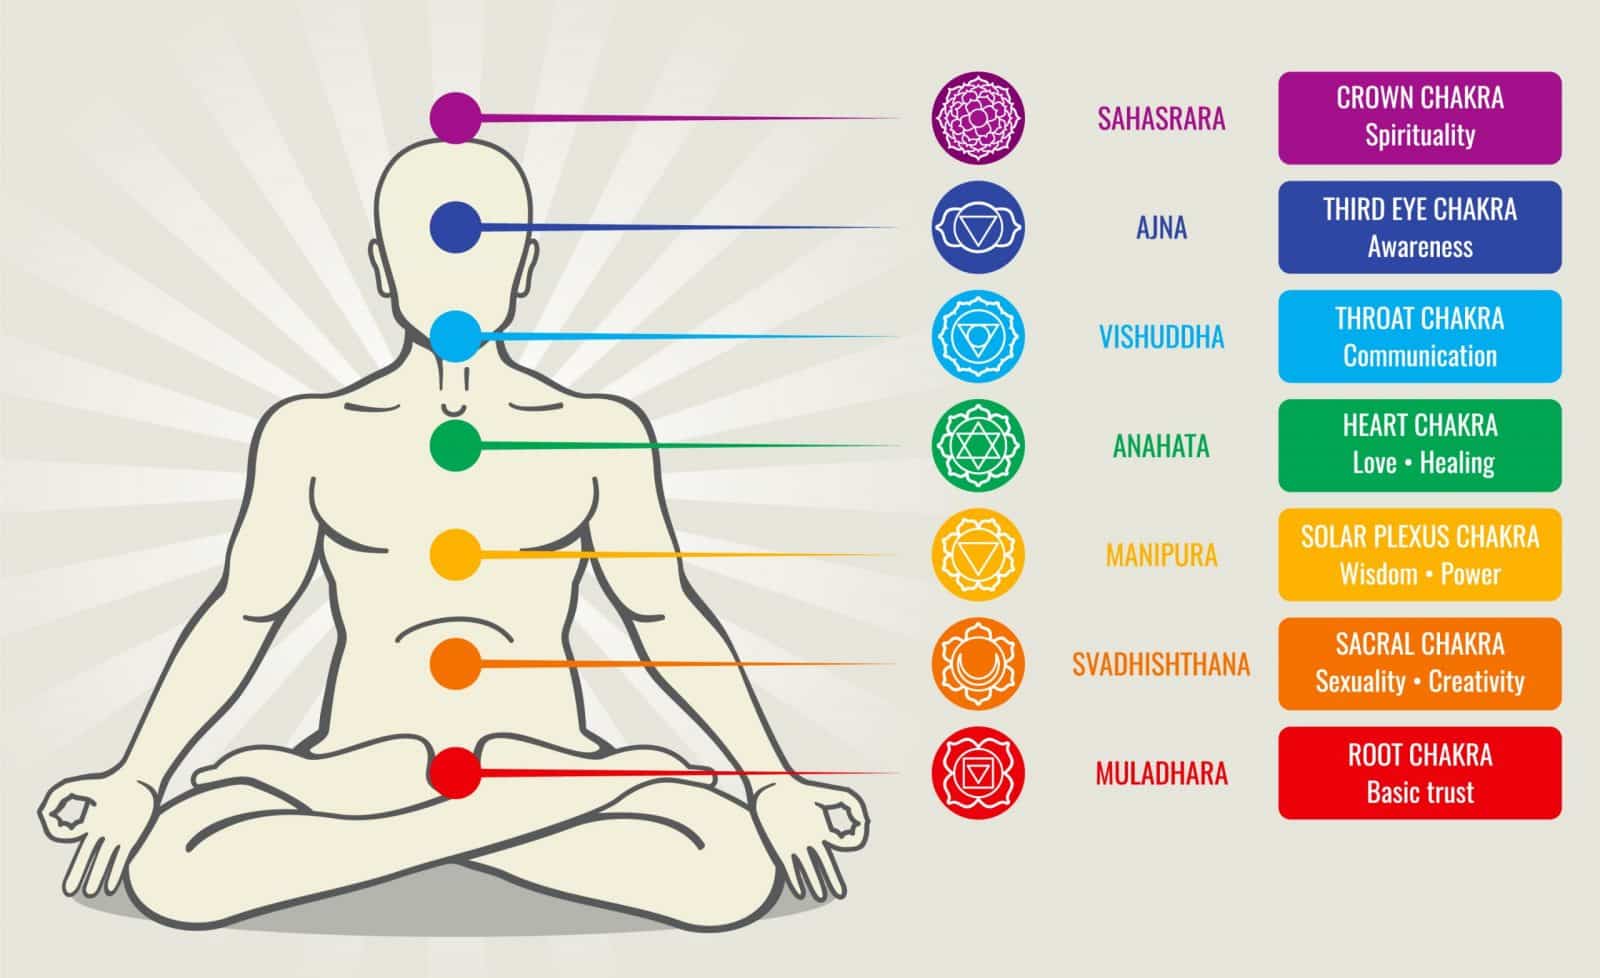 Illustration of the seven main chakras in the human body.